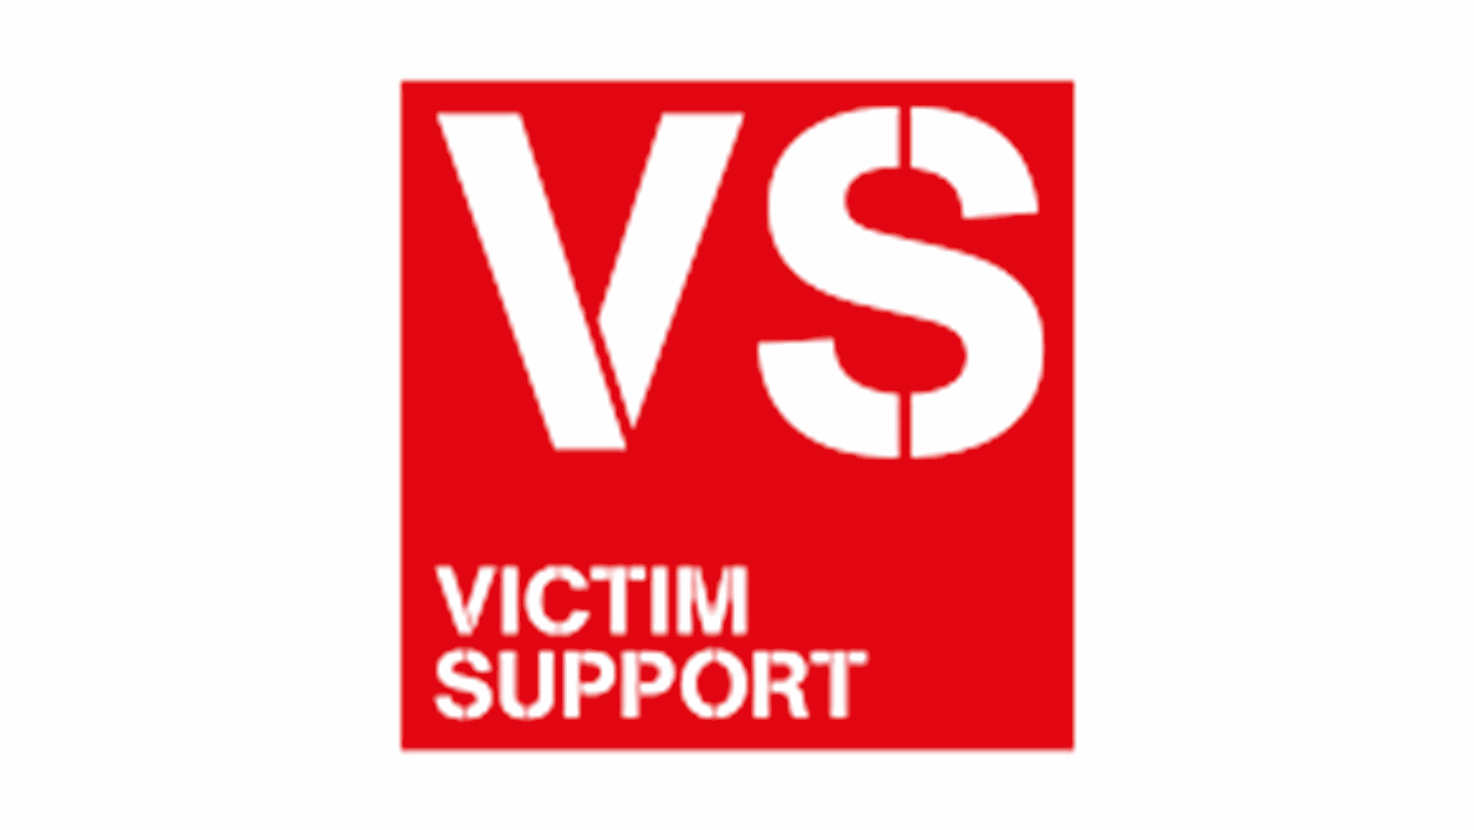 Victim Support will continue to help children and young people affected by Sexual Abuse in Lincolnshire